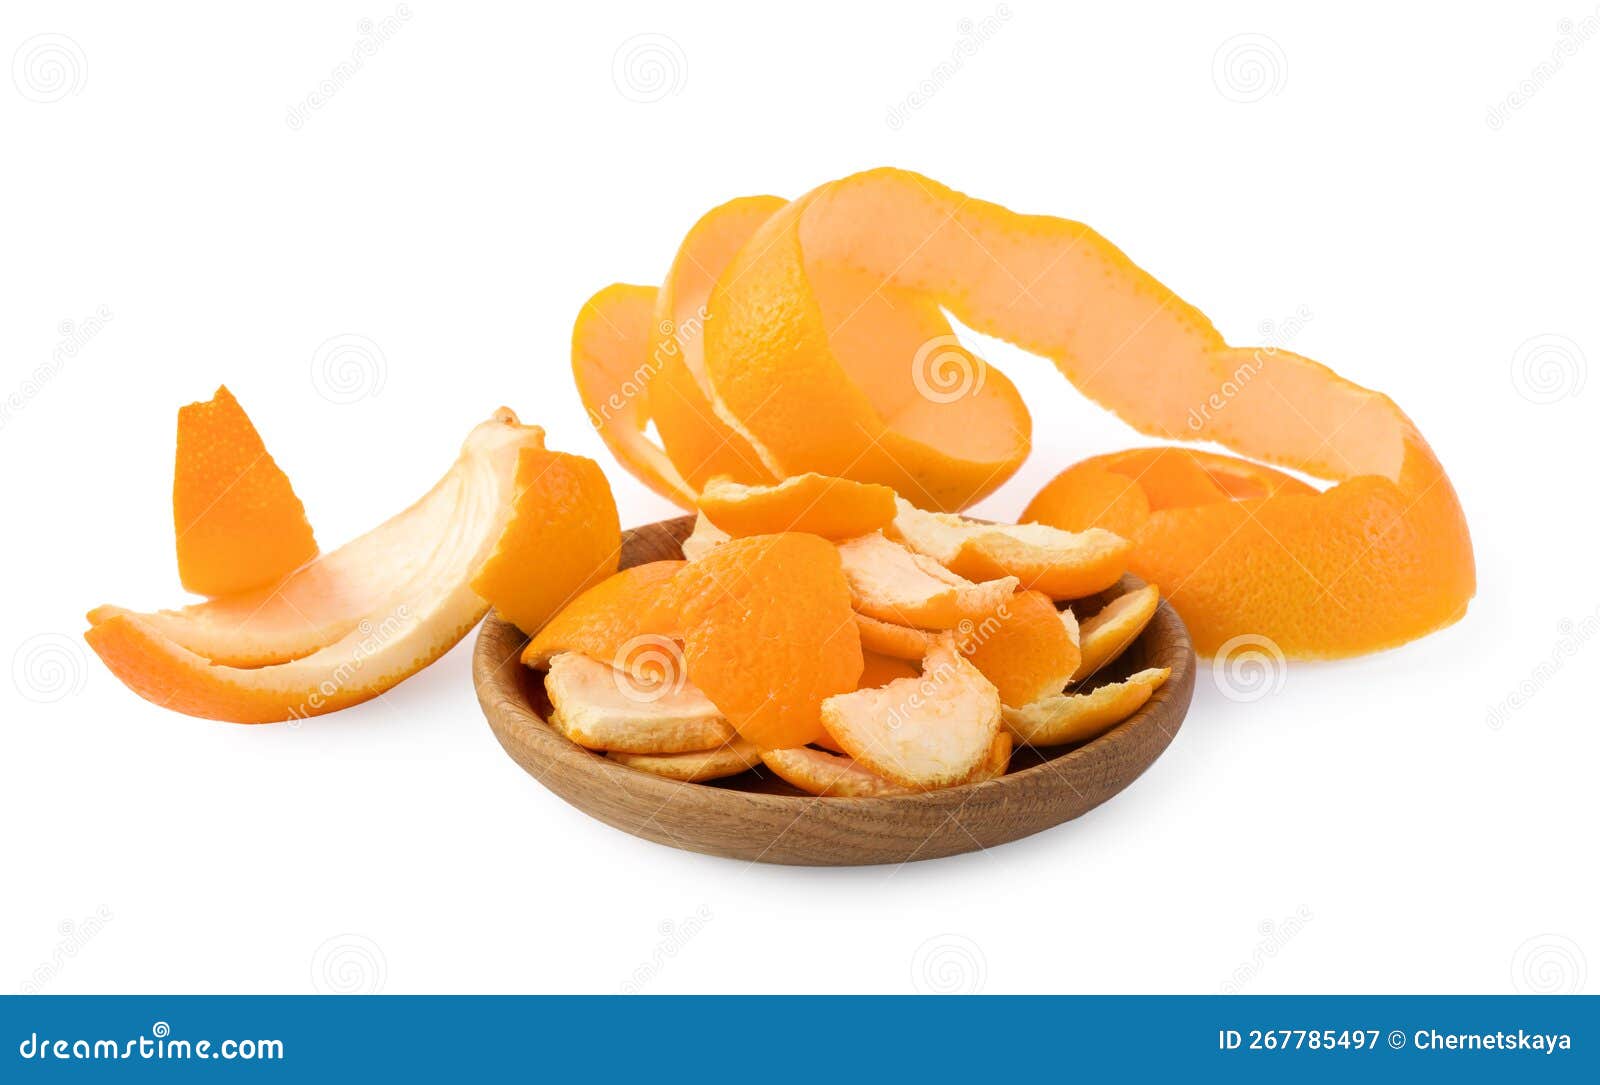 Different Orange Peels Preparing For Drying Isolated On White Stock